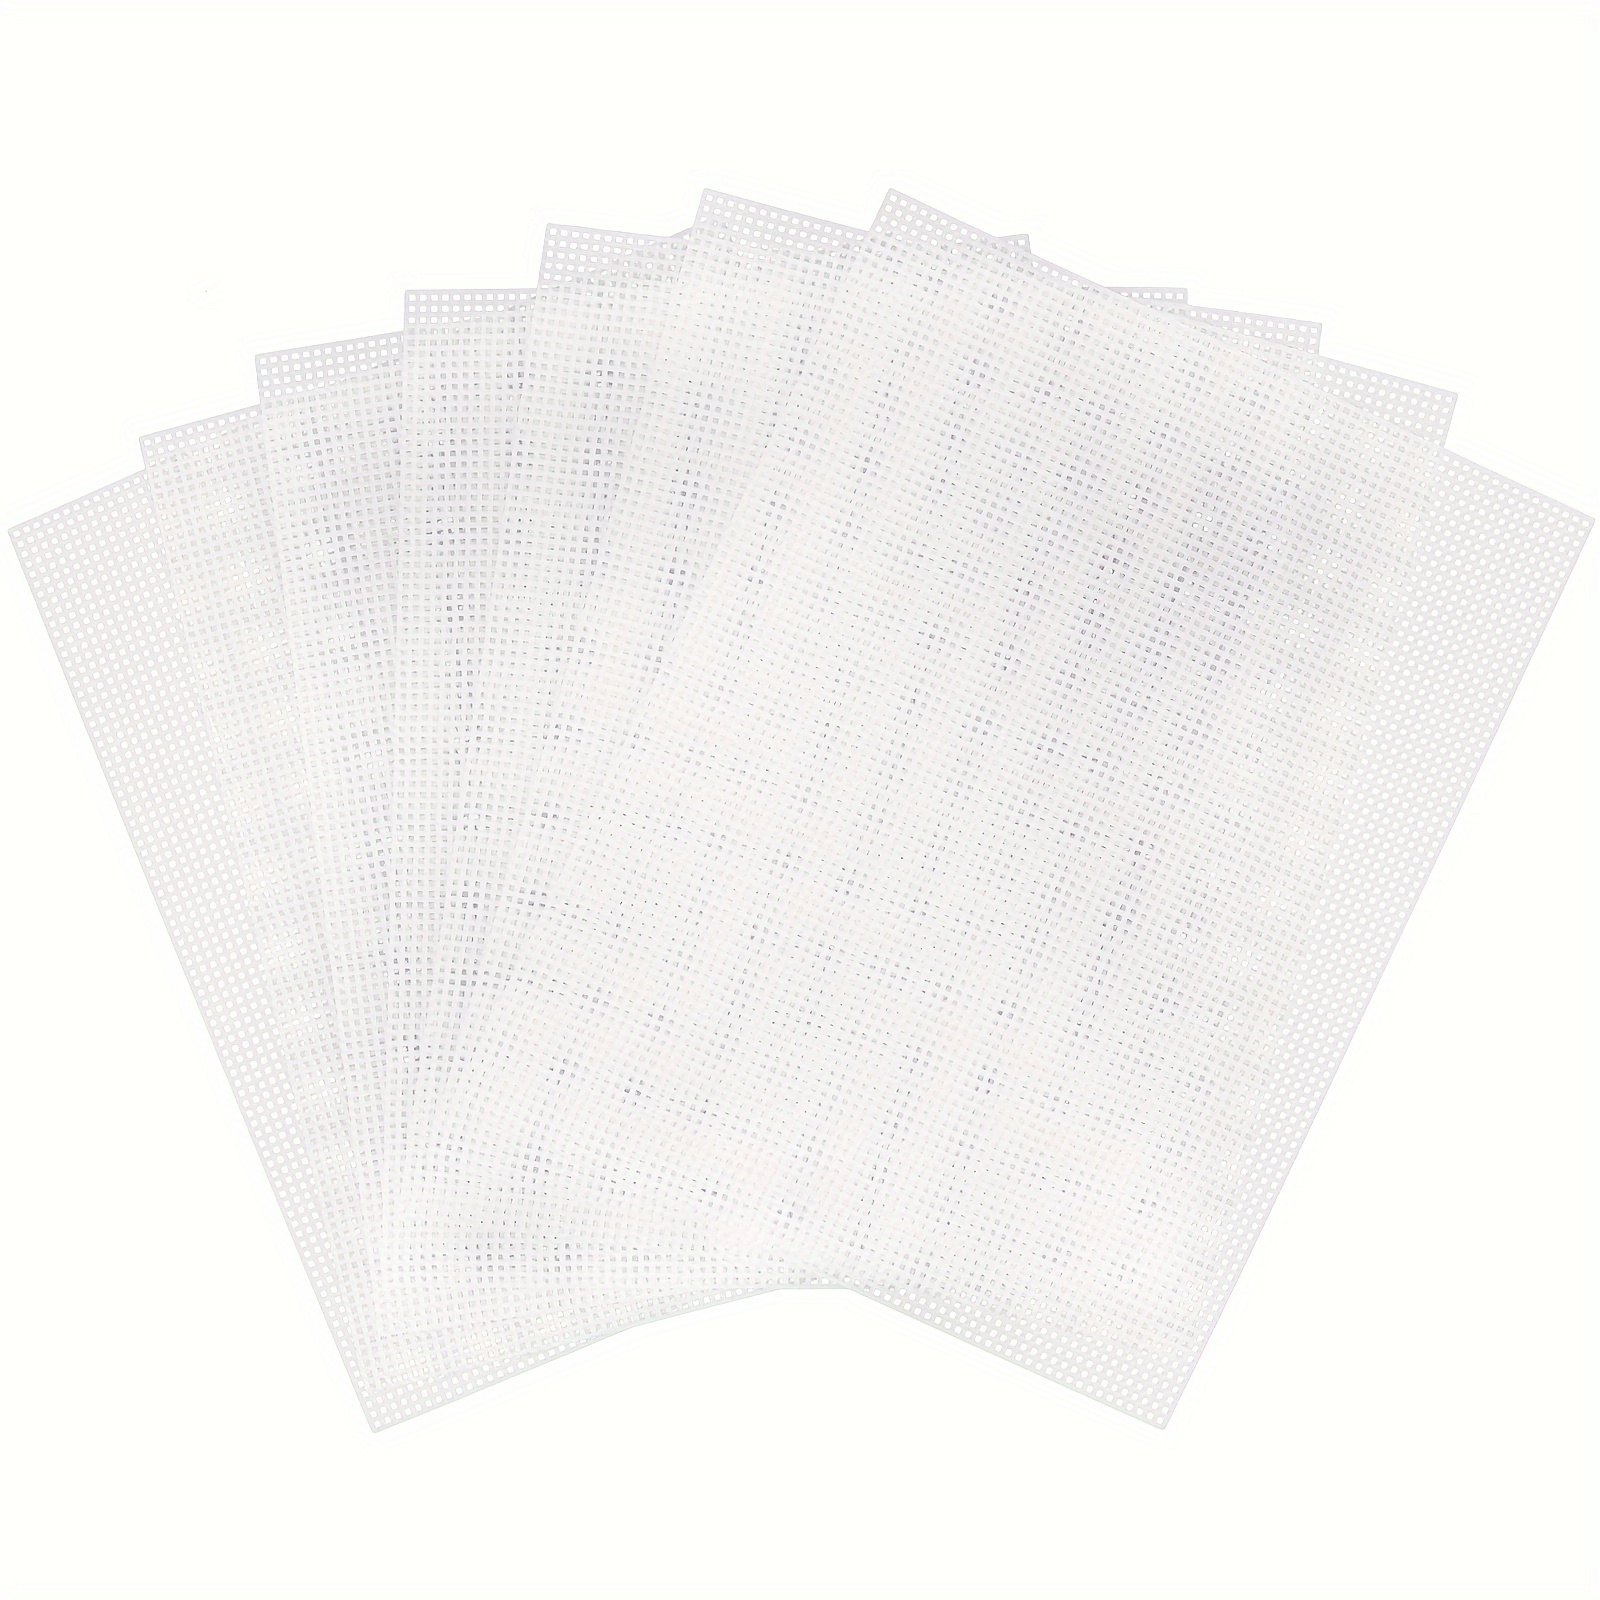 

7sheets Plastic Canvas Sheets, 10.5x13.5 Inches, 7 Count Mesh For Embroidery, Knit, Crochet, Diy Handicraft, Easy-to-cut Dividers, Crafting Essentials